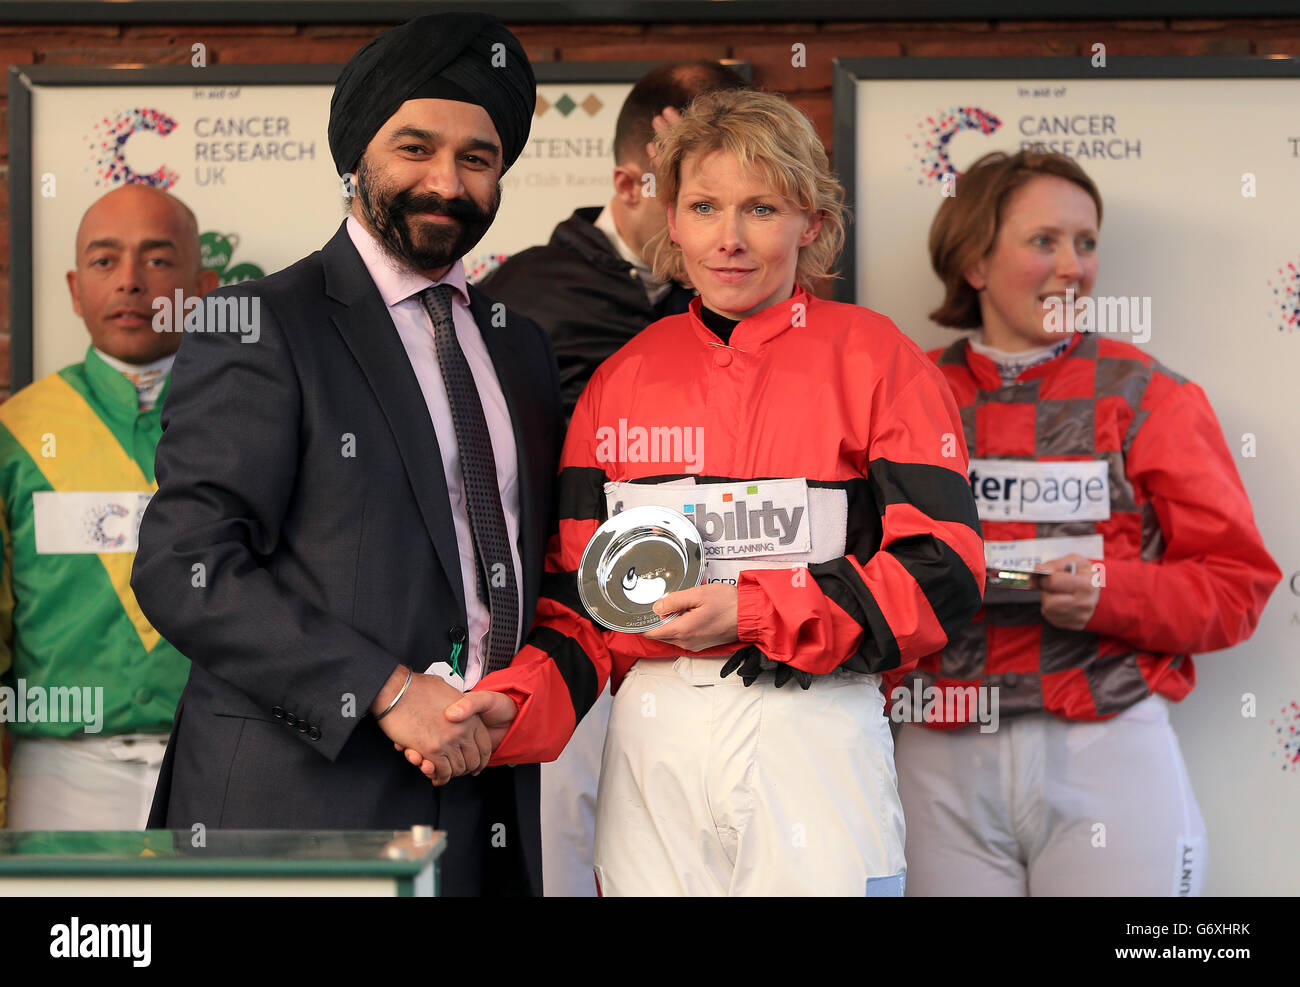 Competitors accept awards after competing in the Cancer Research UK charity race during St Patrick's Day at Cheltenham Racecourse Stock Photo